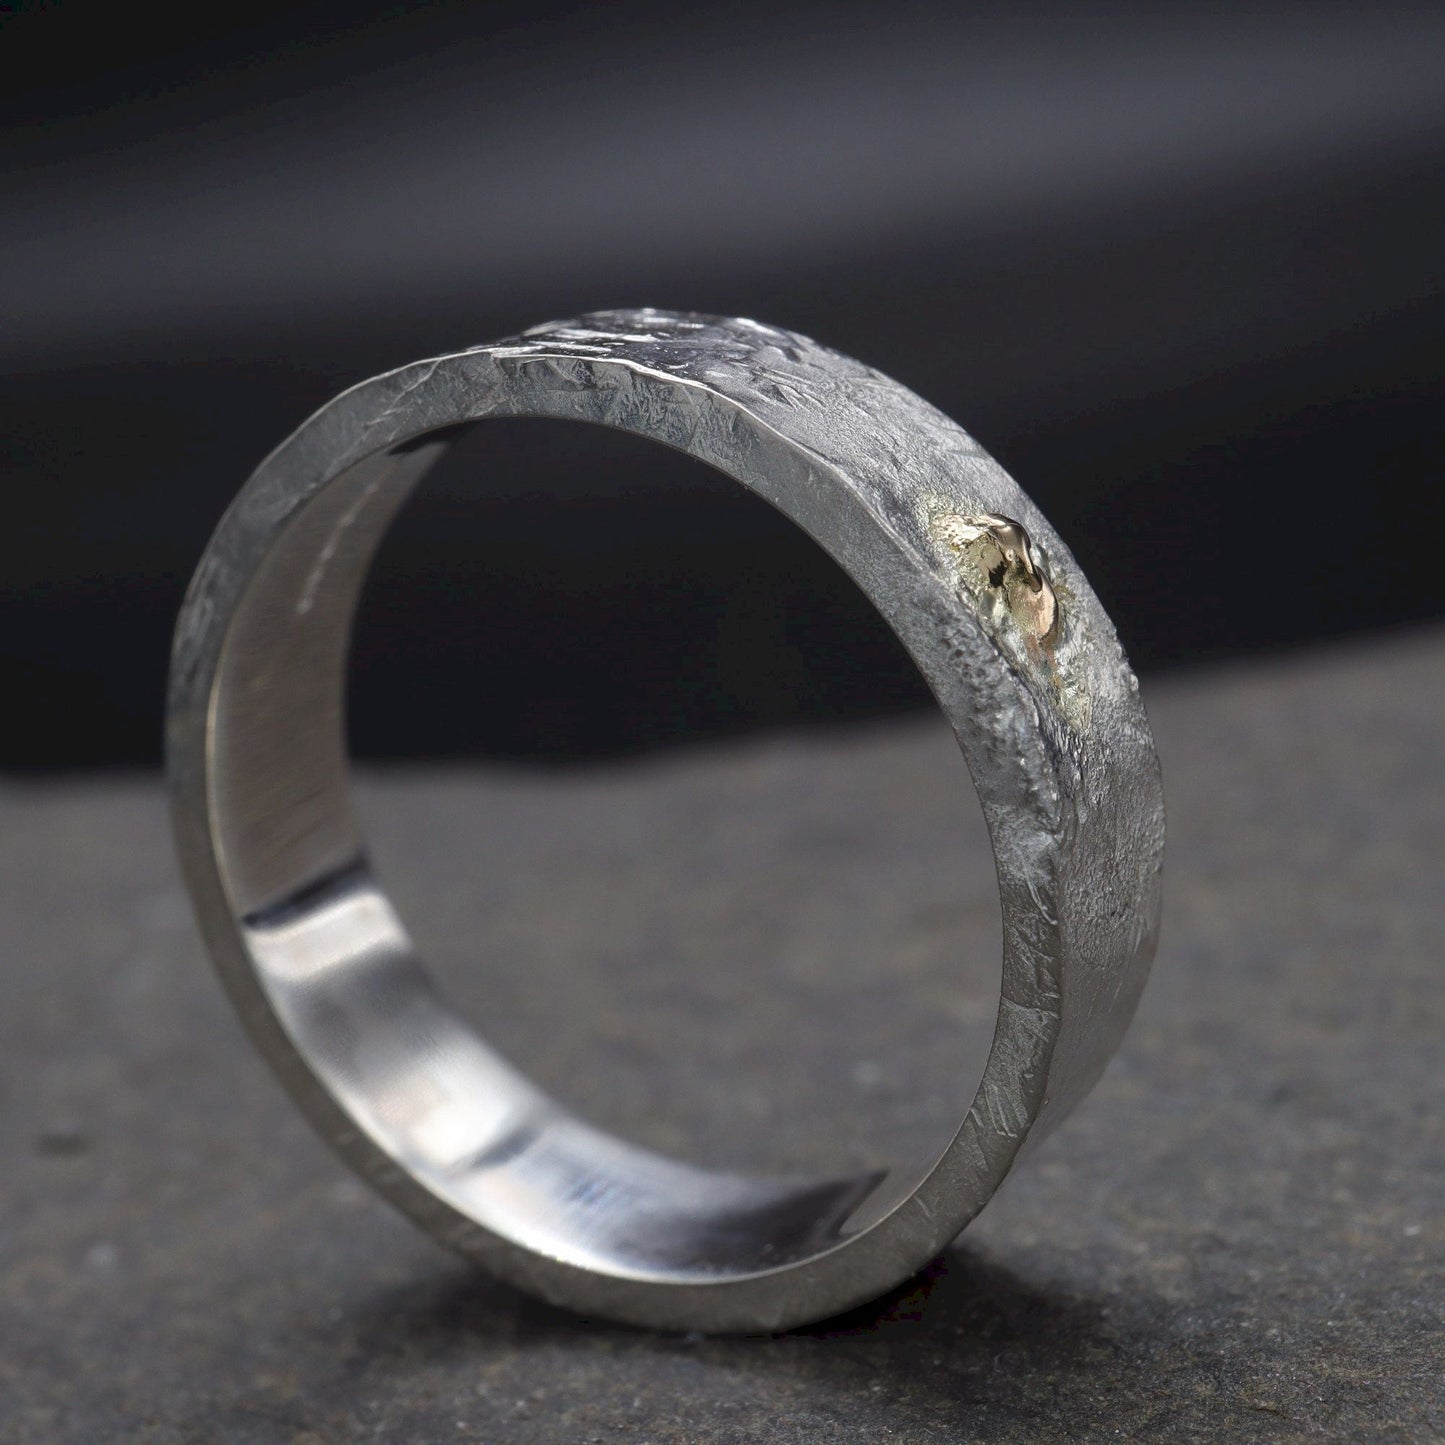 Silver and gold mens engagement ring - hammered textured band - Windermere Sunspot design.